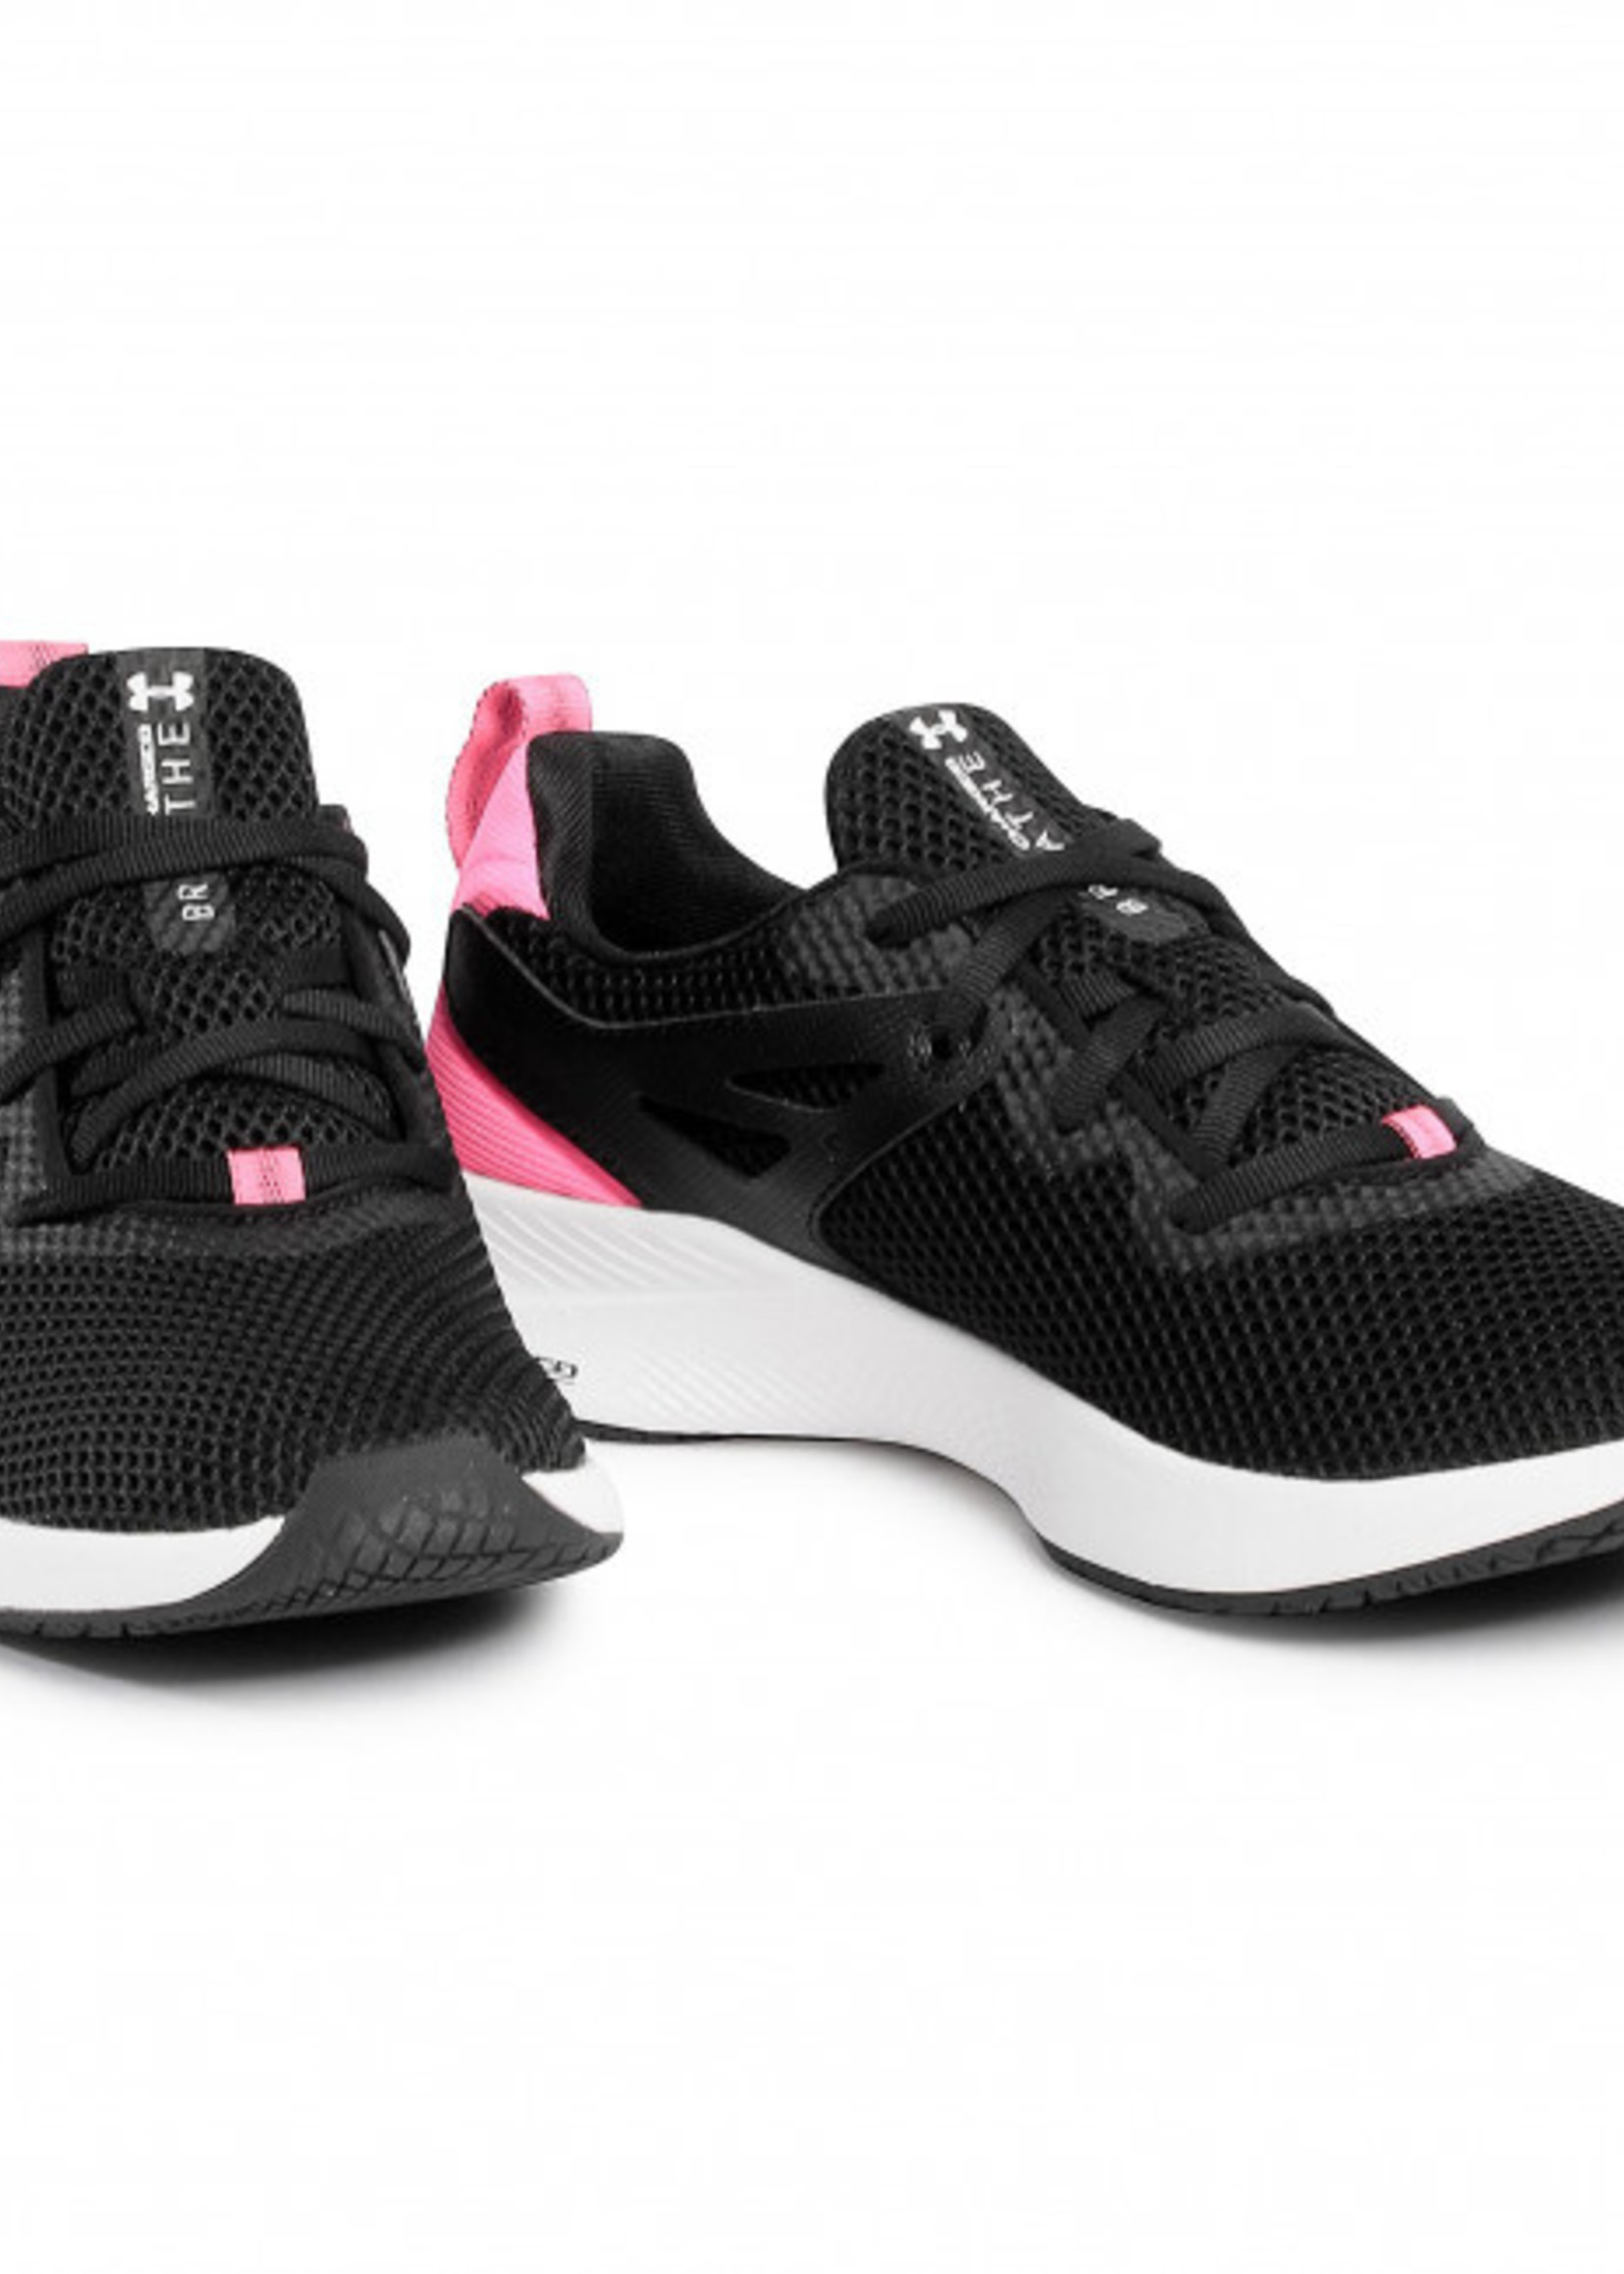 Under Armour WOMEN'S UA CHARGED BREATHE TRAINER 2 NM TRAINING SHOES 3023012